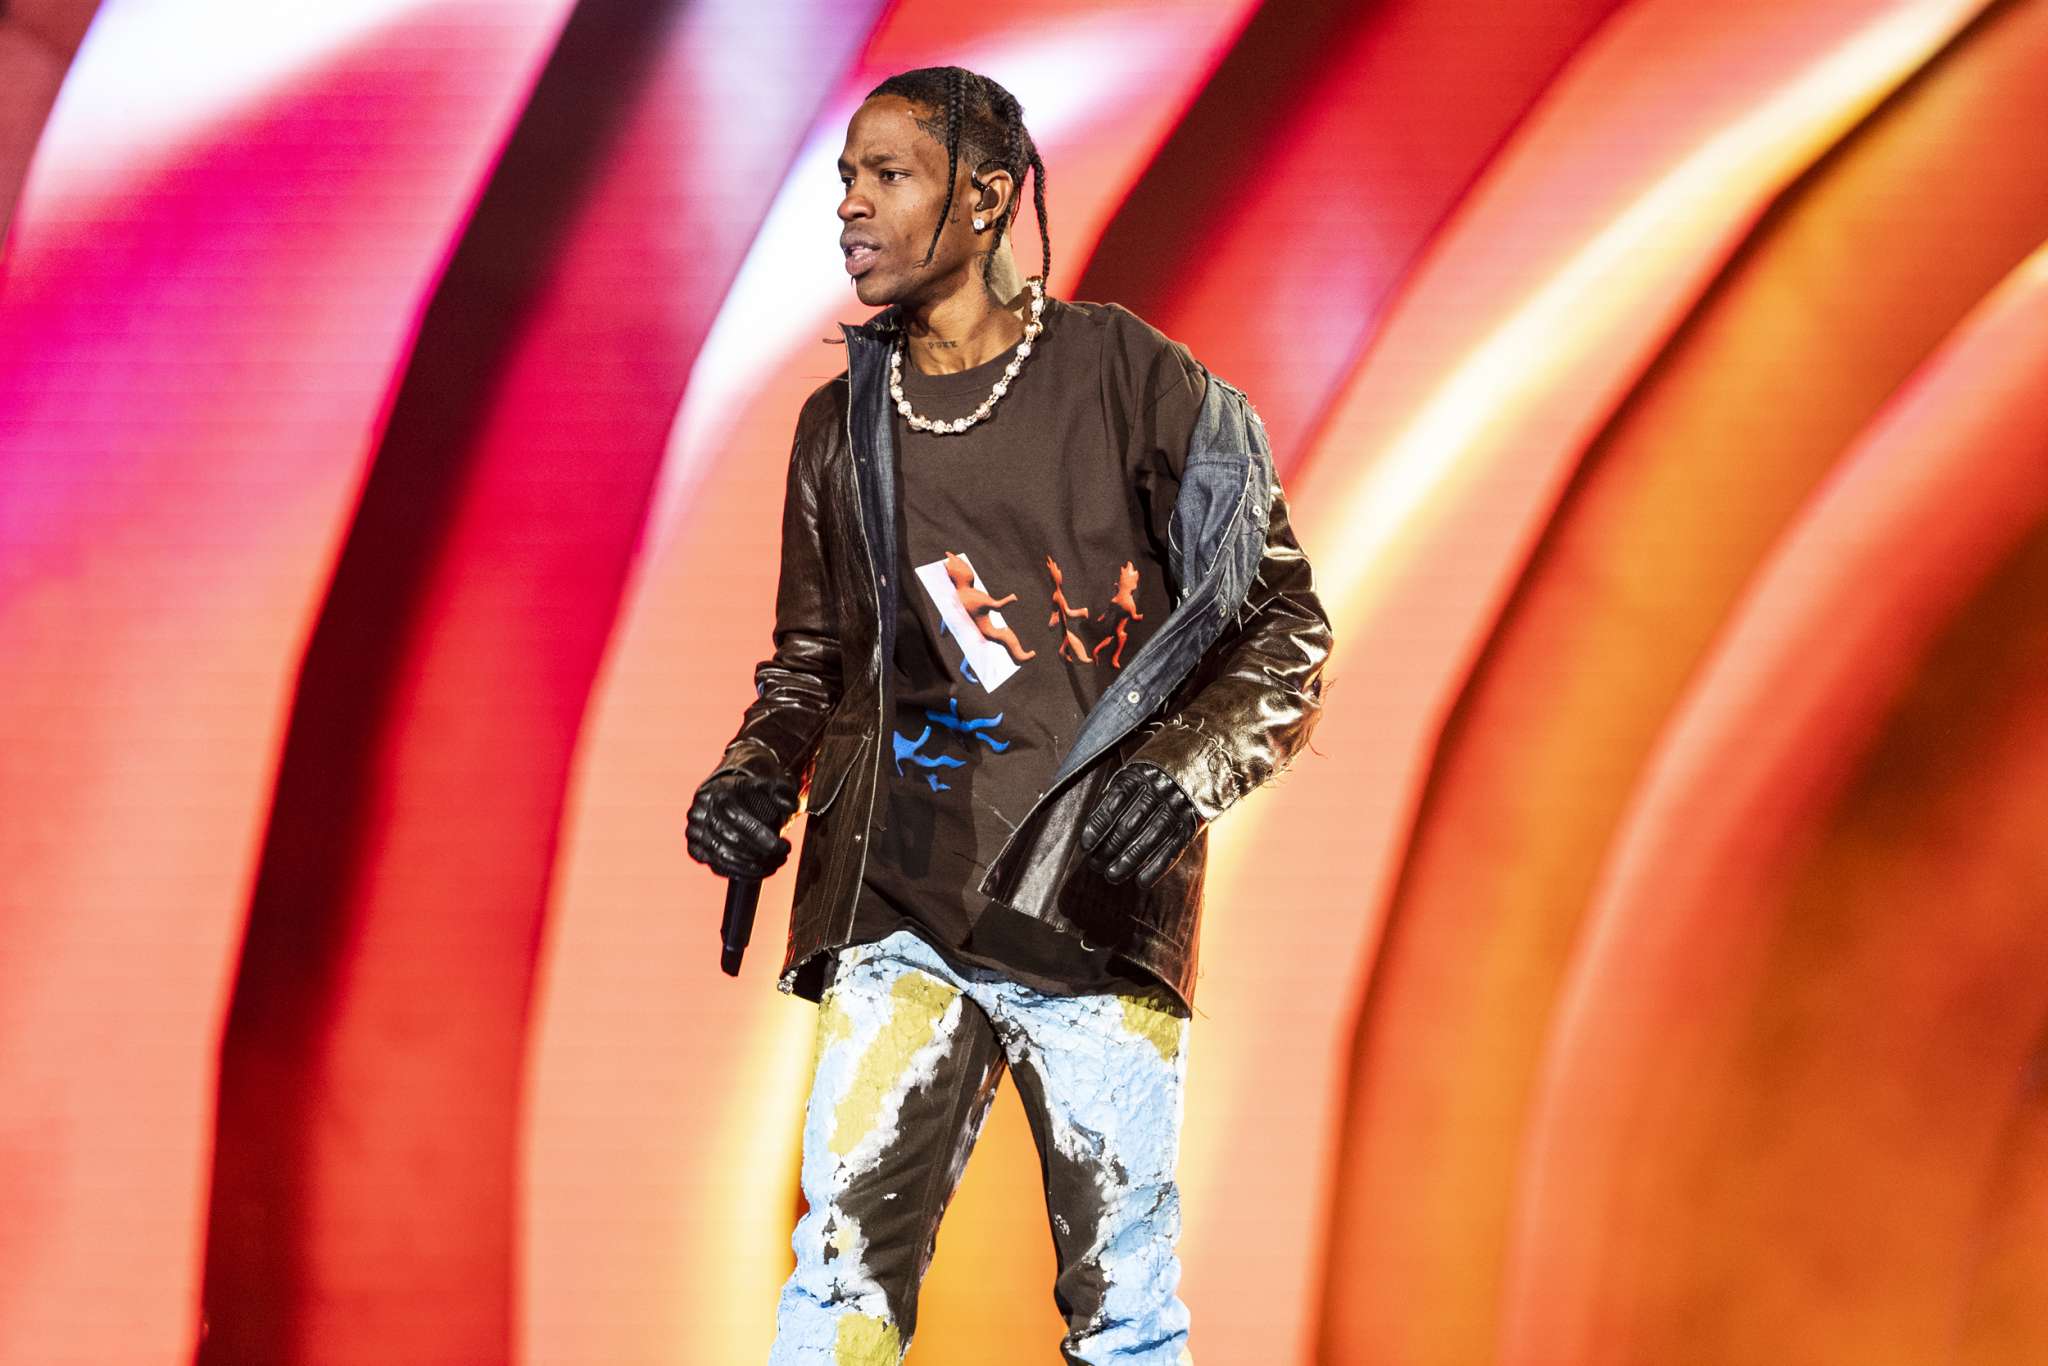 travis-scott-faces-massive-legal-issues-after-facing-more-lawsuits-following-astroworld